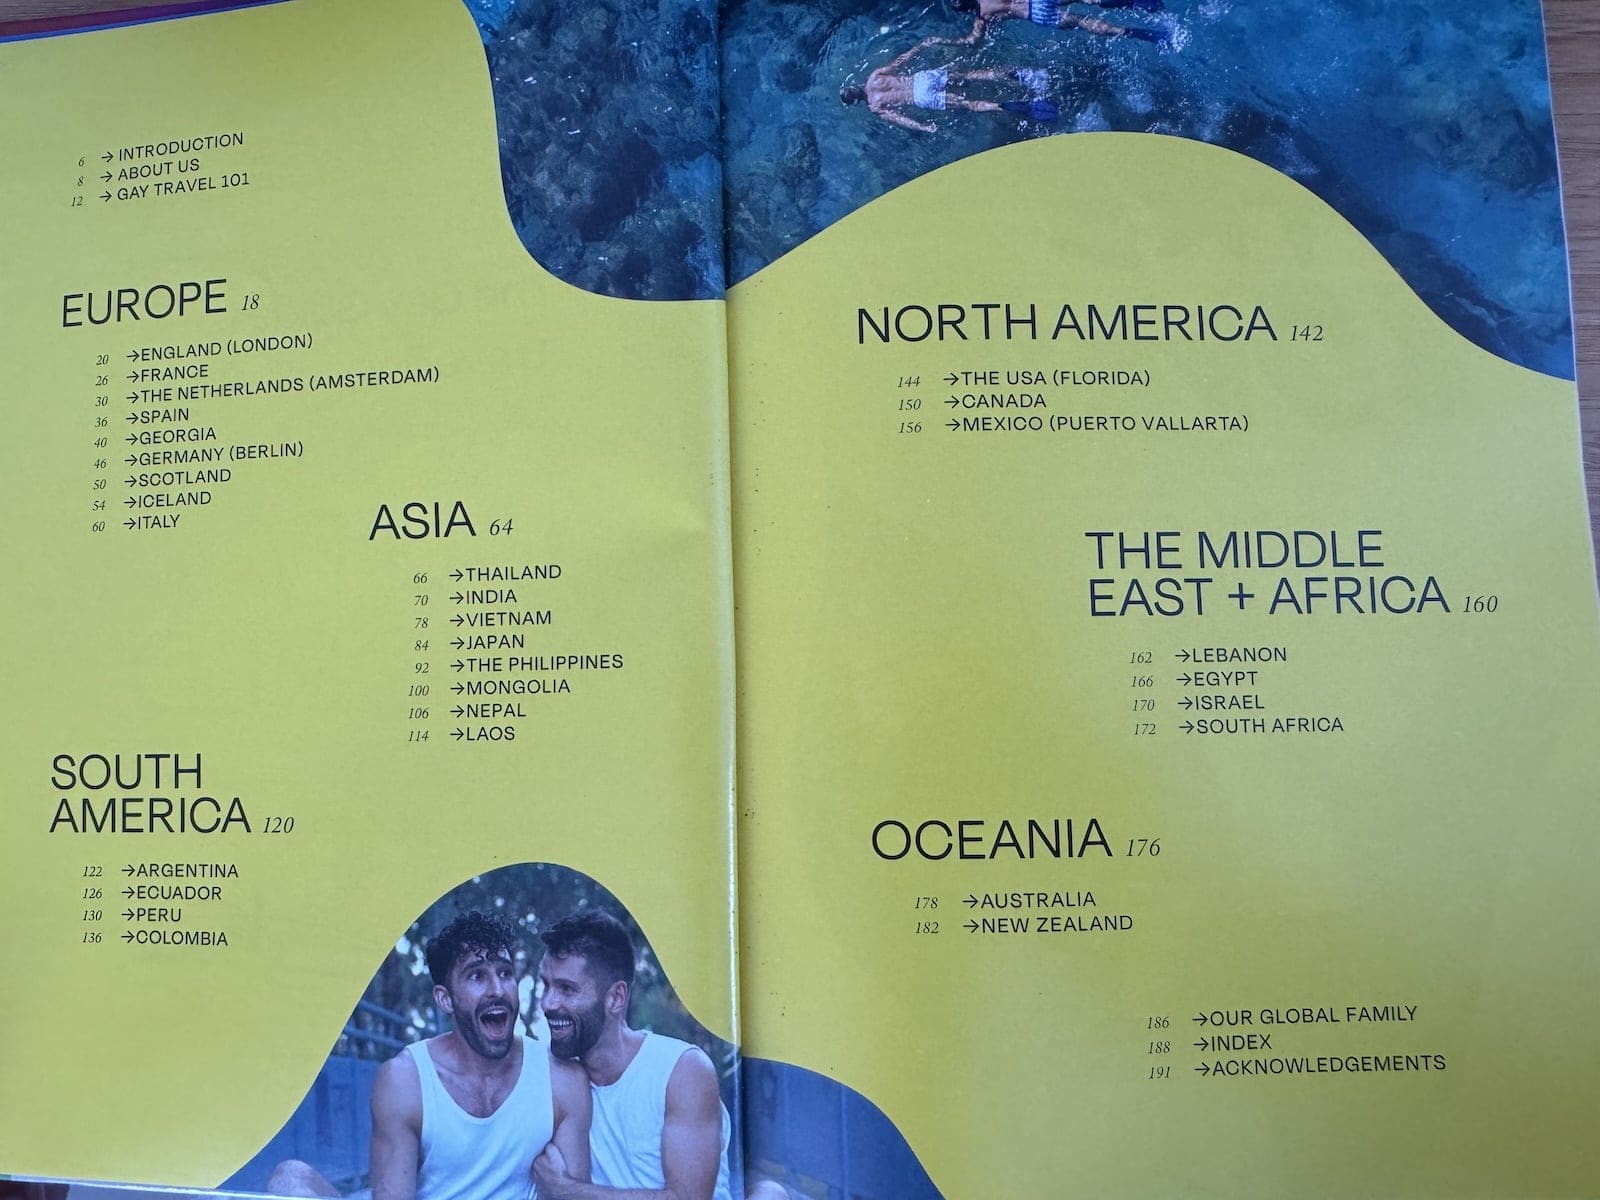 The Contents page list of destinations in our gay travel book.